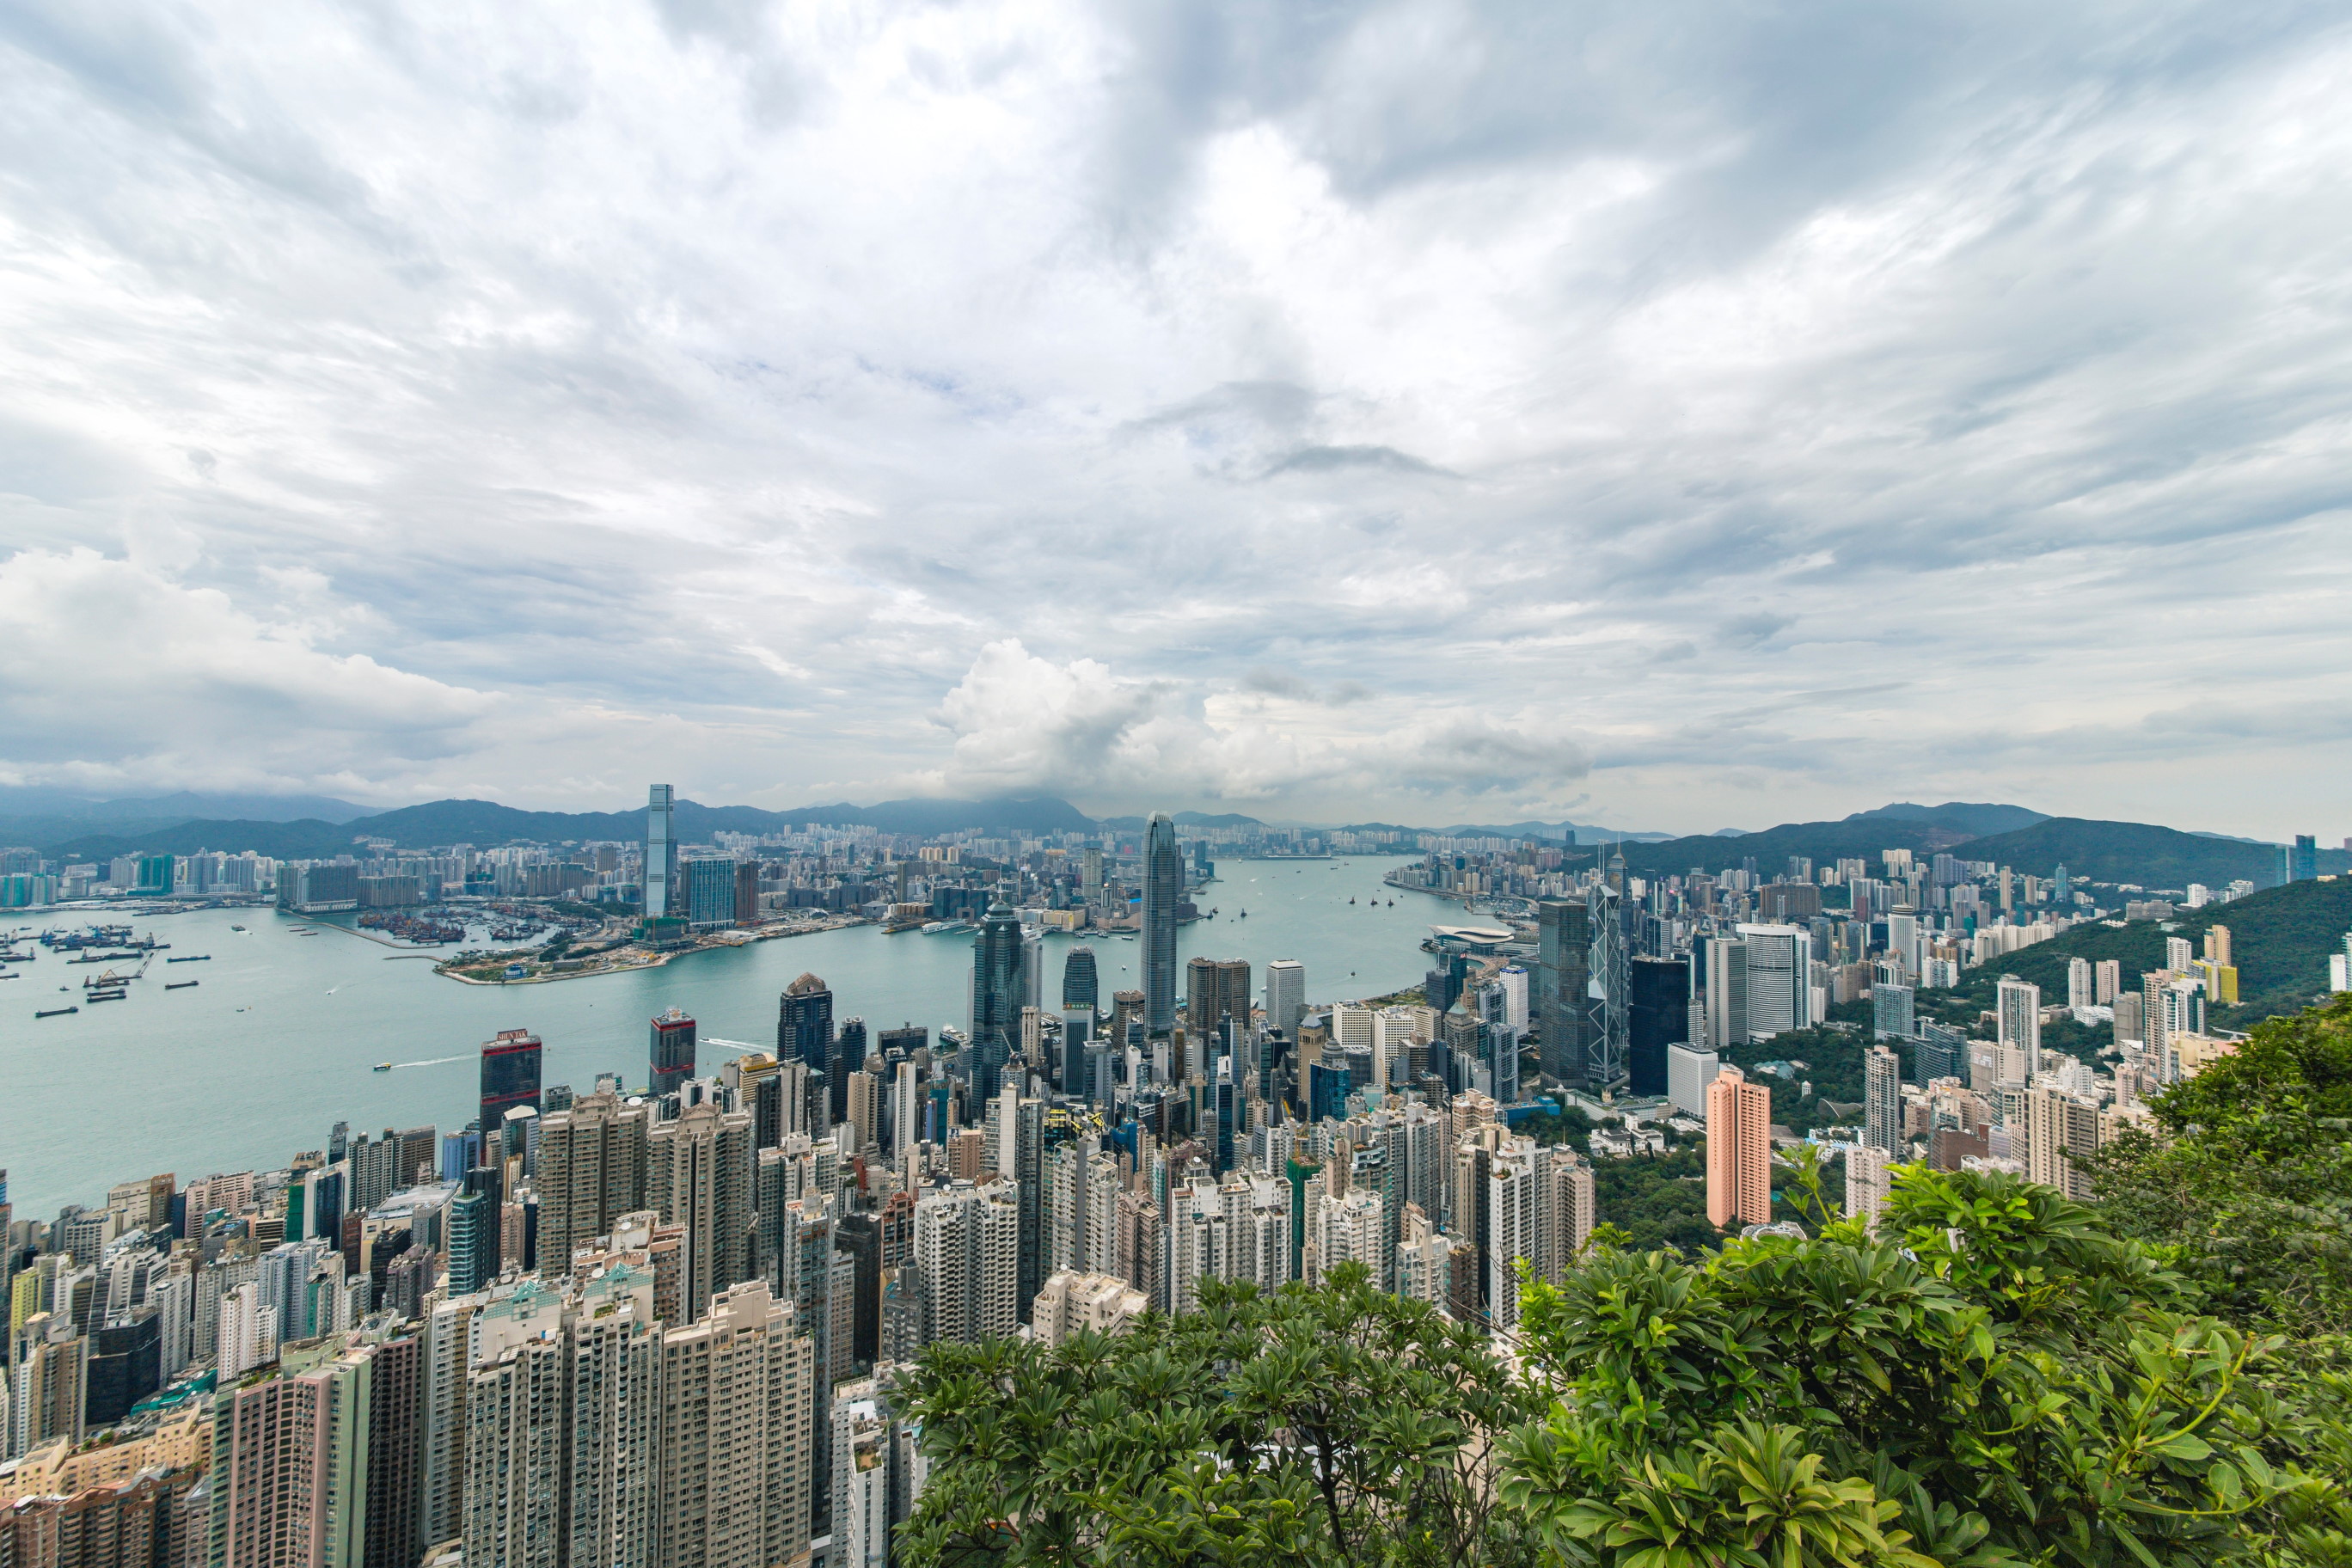 The famous Hong Kong skyline seen from Victoria’s Peak makes for a breathtaking view